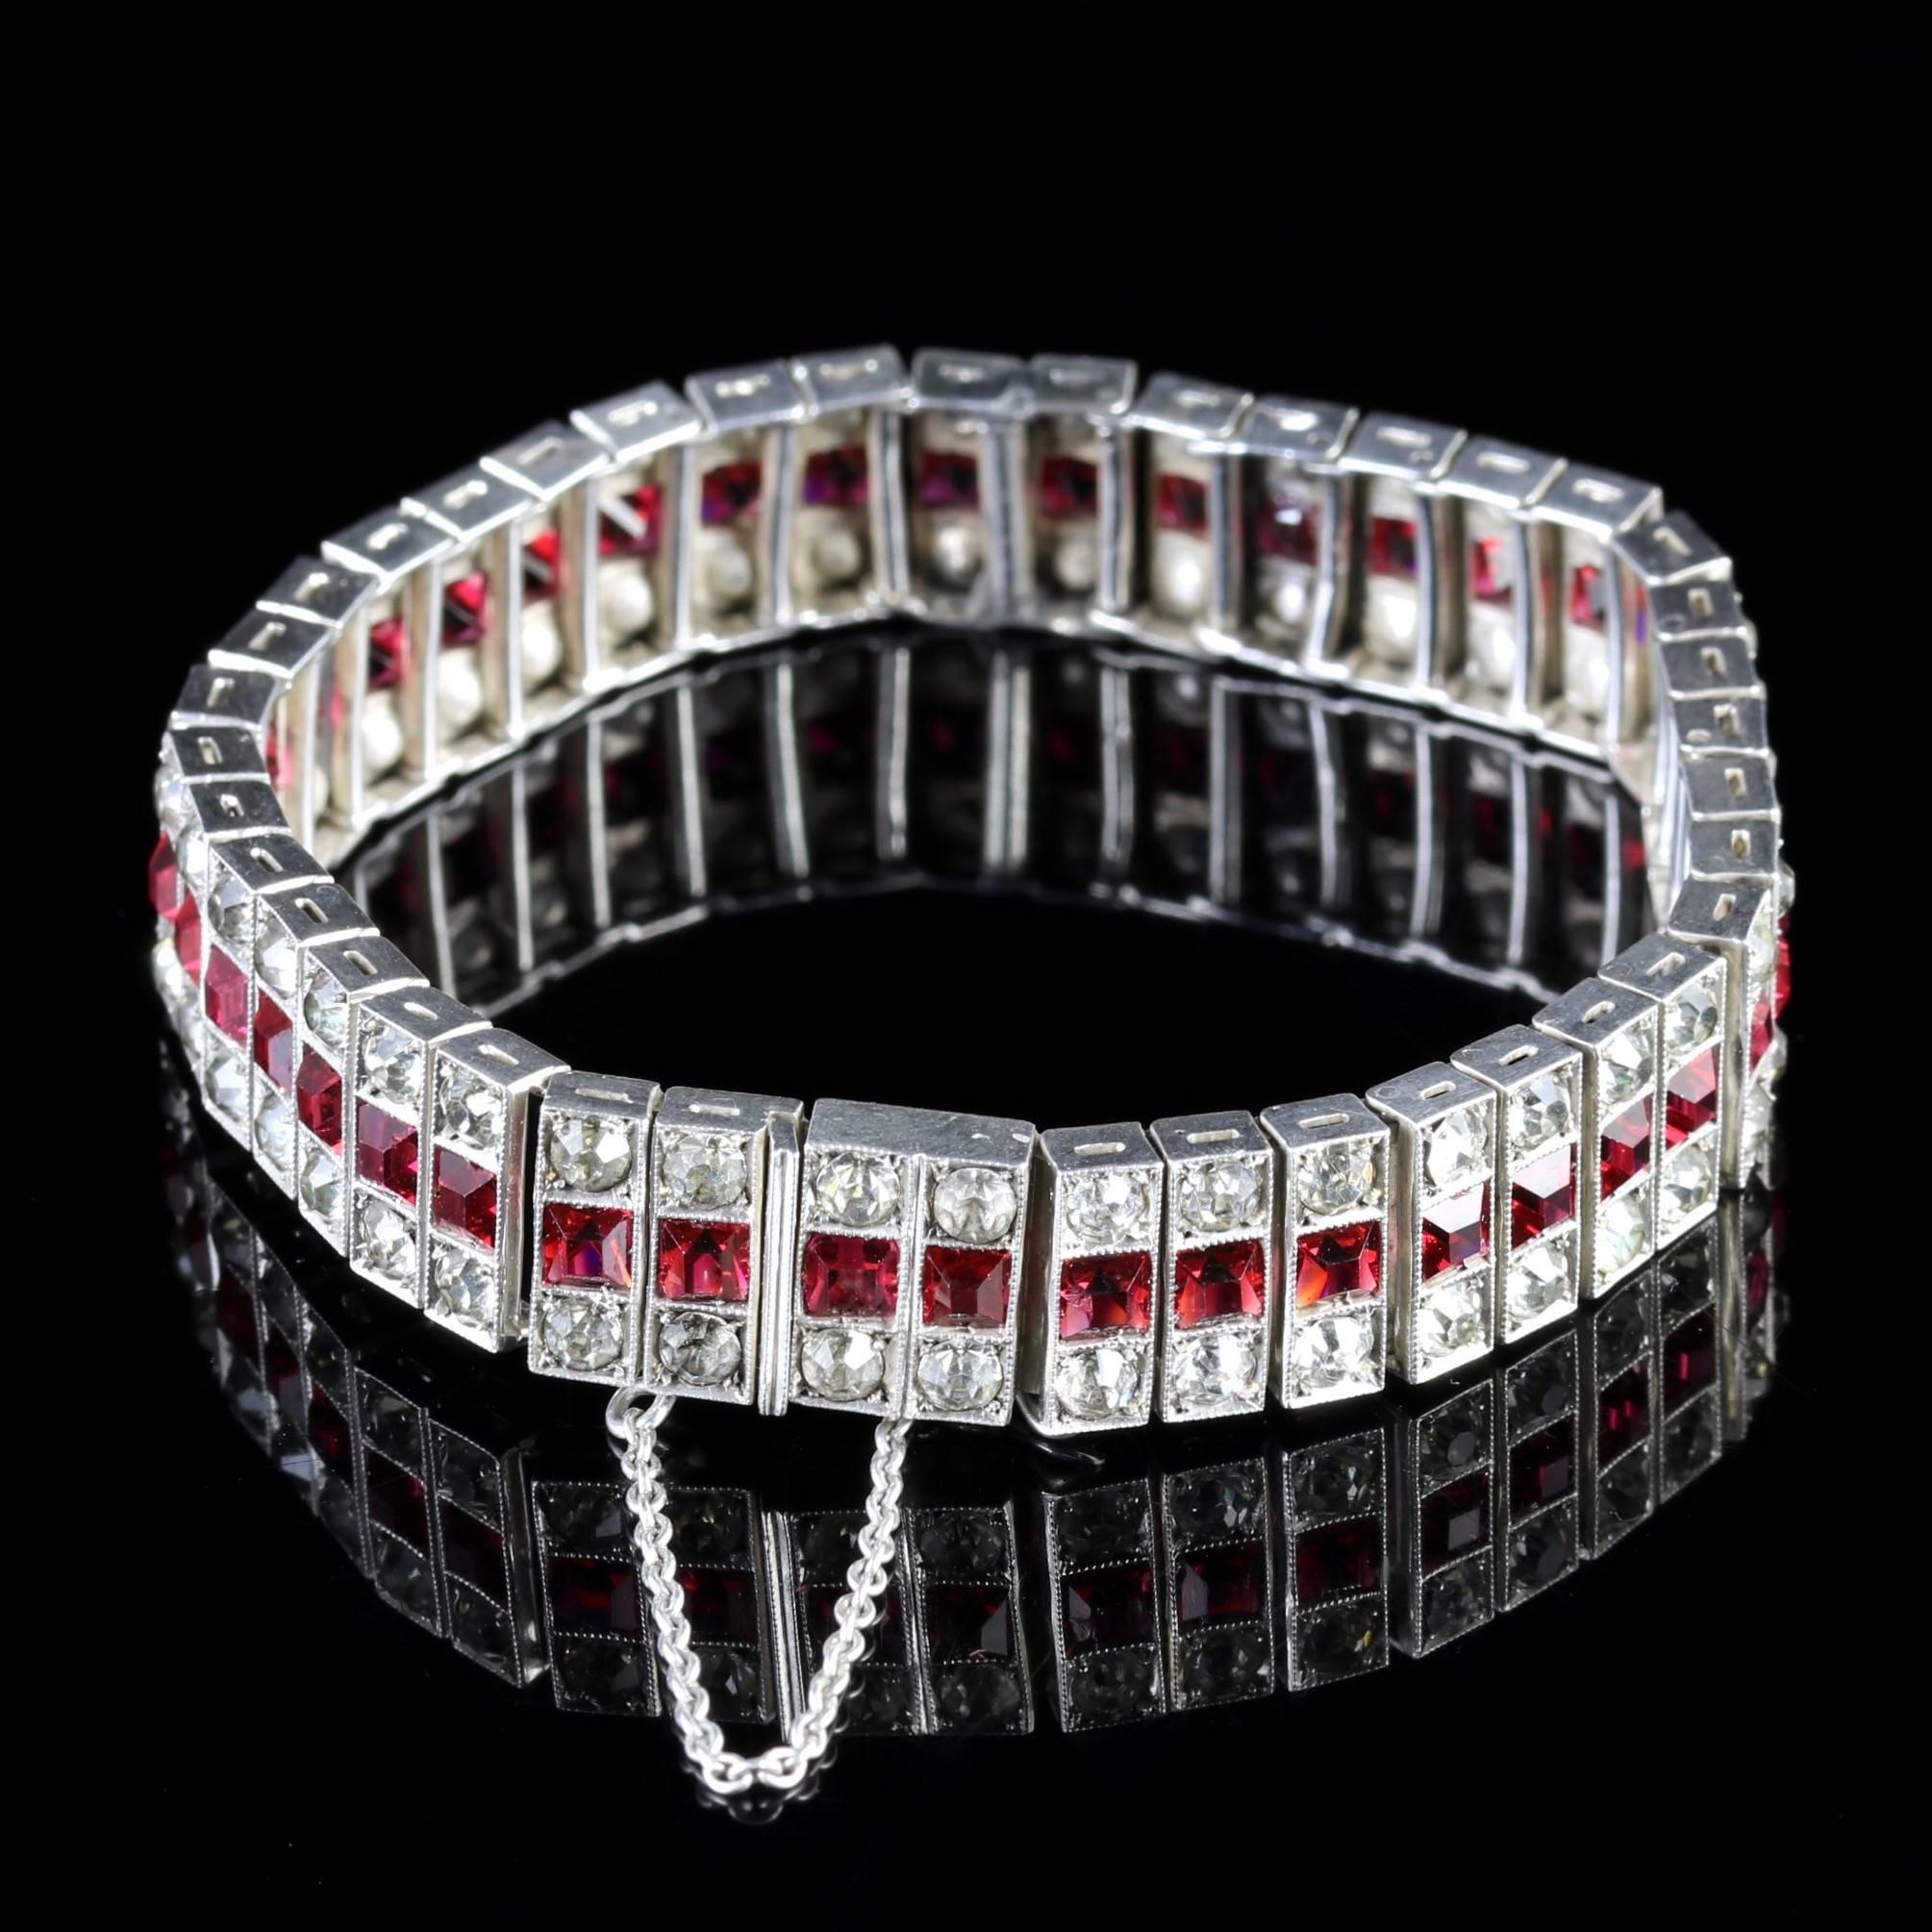 This genuine Sterling Silver Art Deco Ruby Paste bracelet is beautiful, Circa 1920.

Art Deco, named after the 1925 Paris Exposition des Arts Decoratifs et Industriels Modernes, represents the style of the decorative arts popular between the two